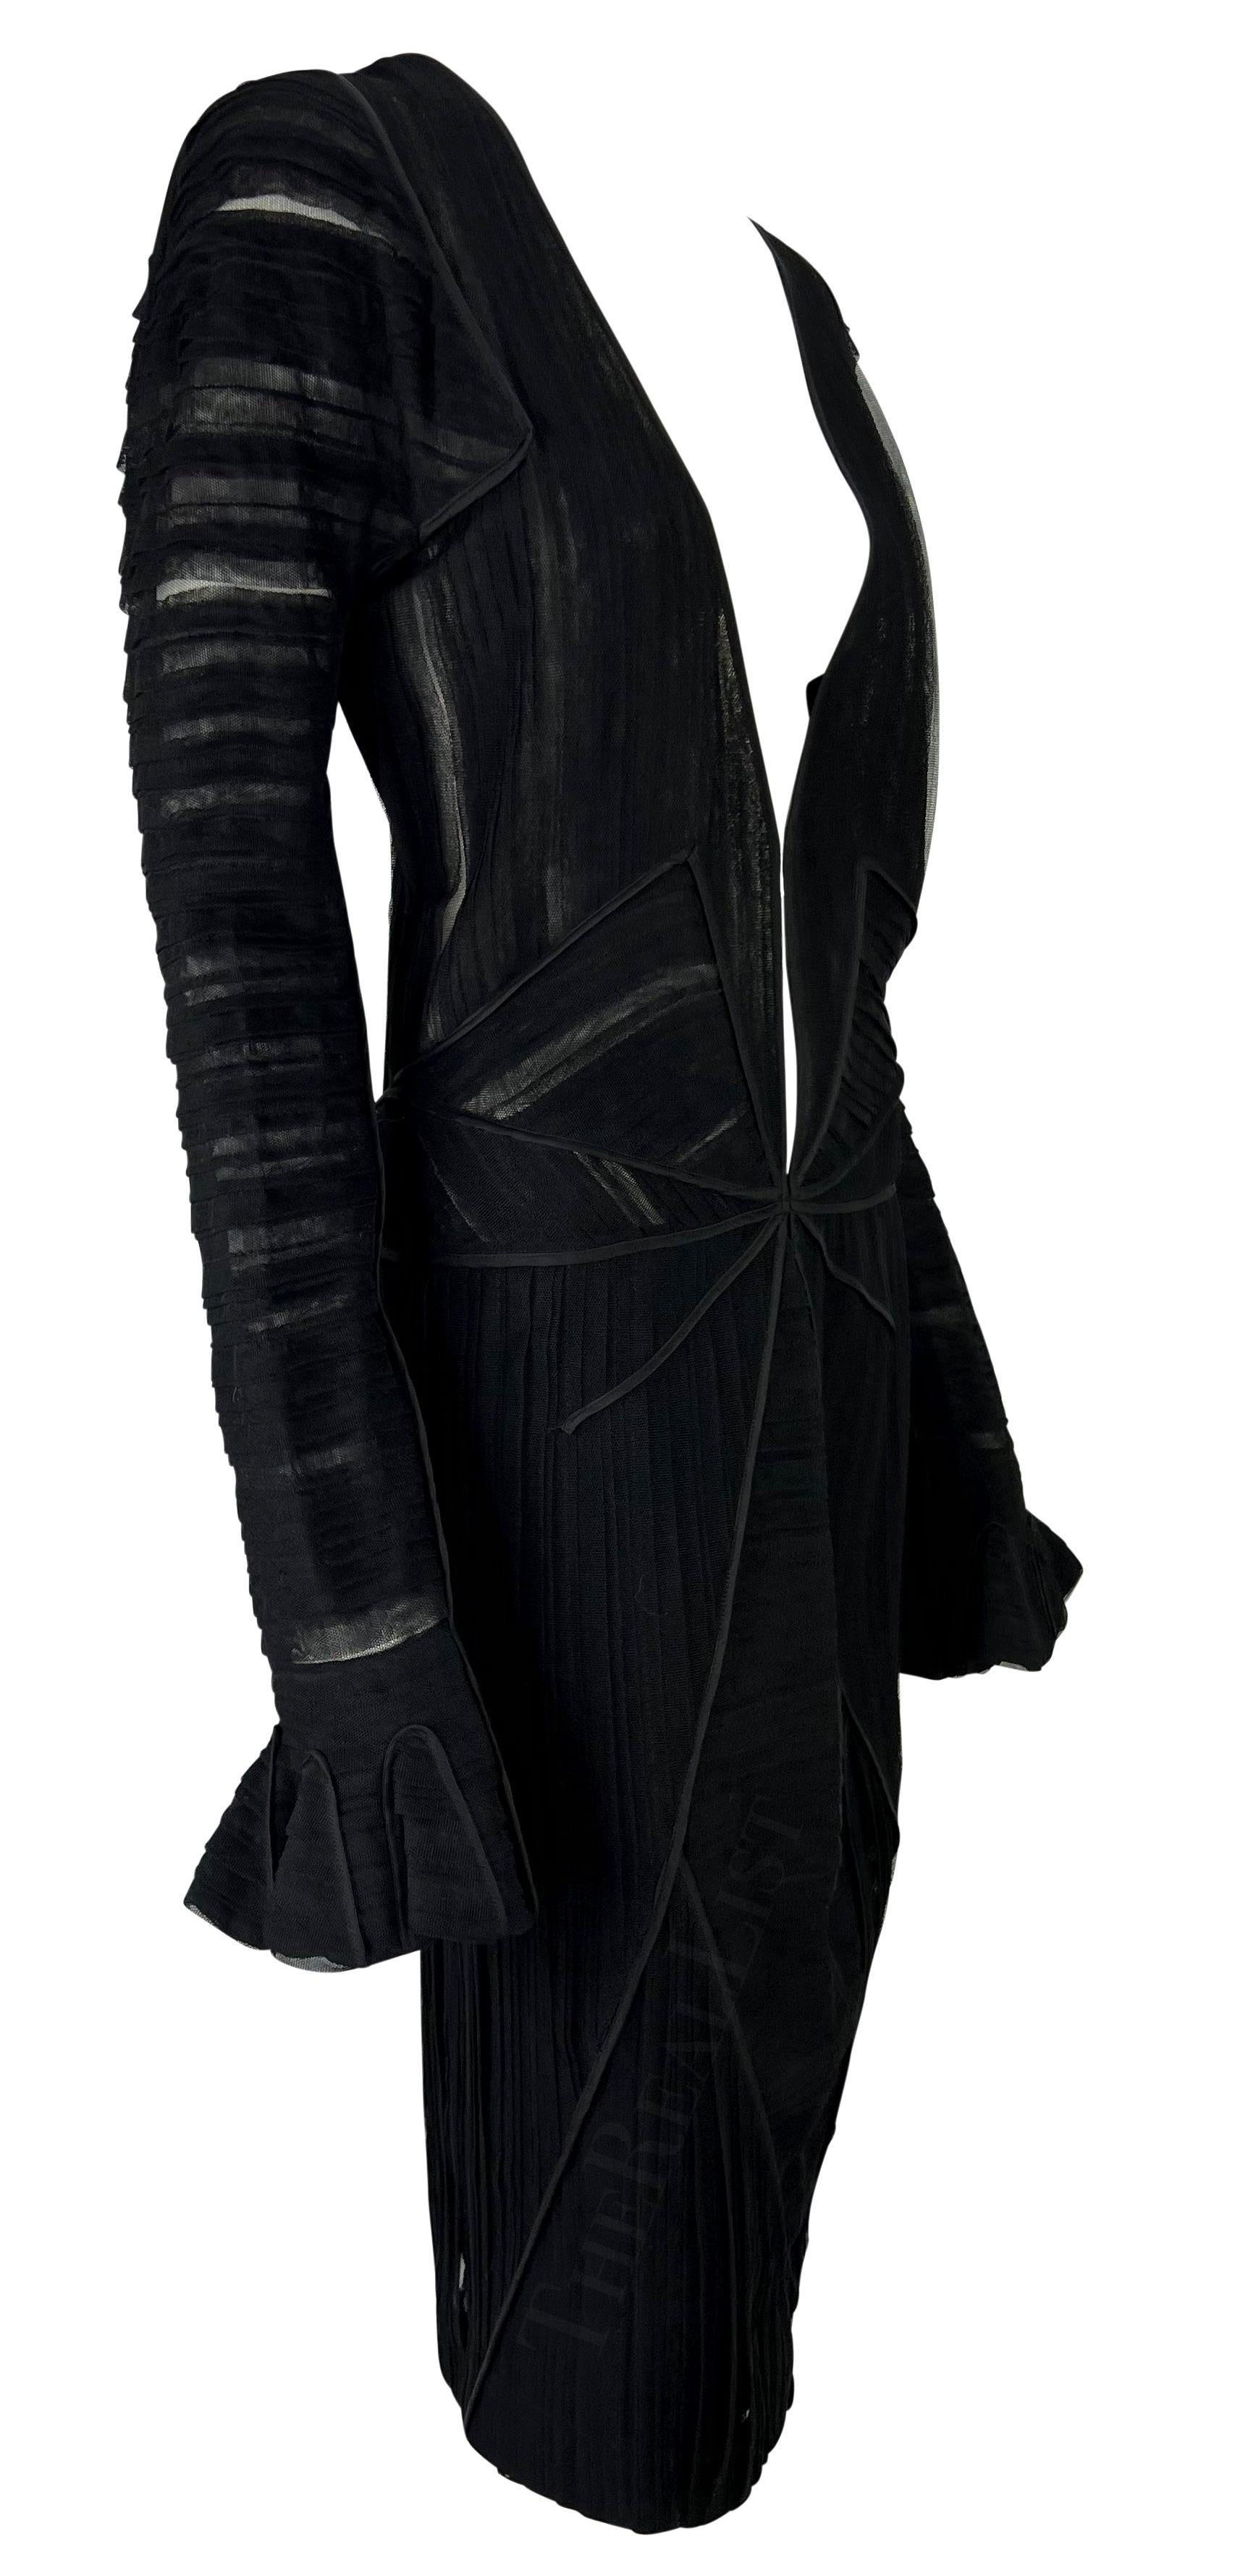 F/W 2002 Yves Saint Laurent by Tom Ford Black Tulle Plunging Runway Dress 2